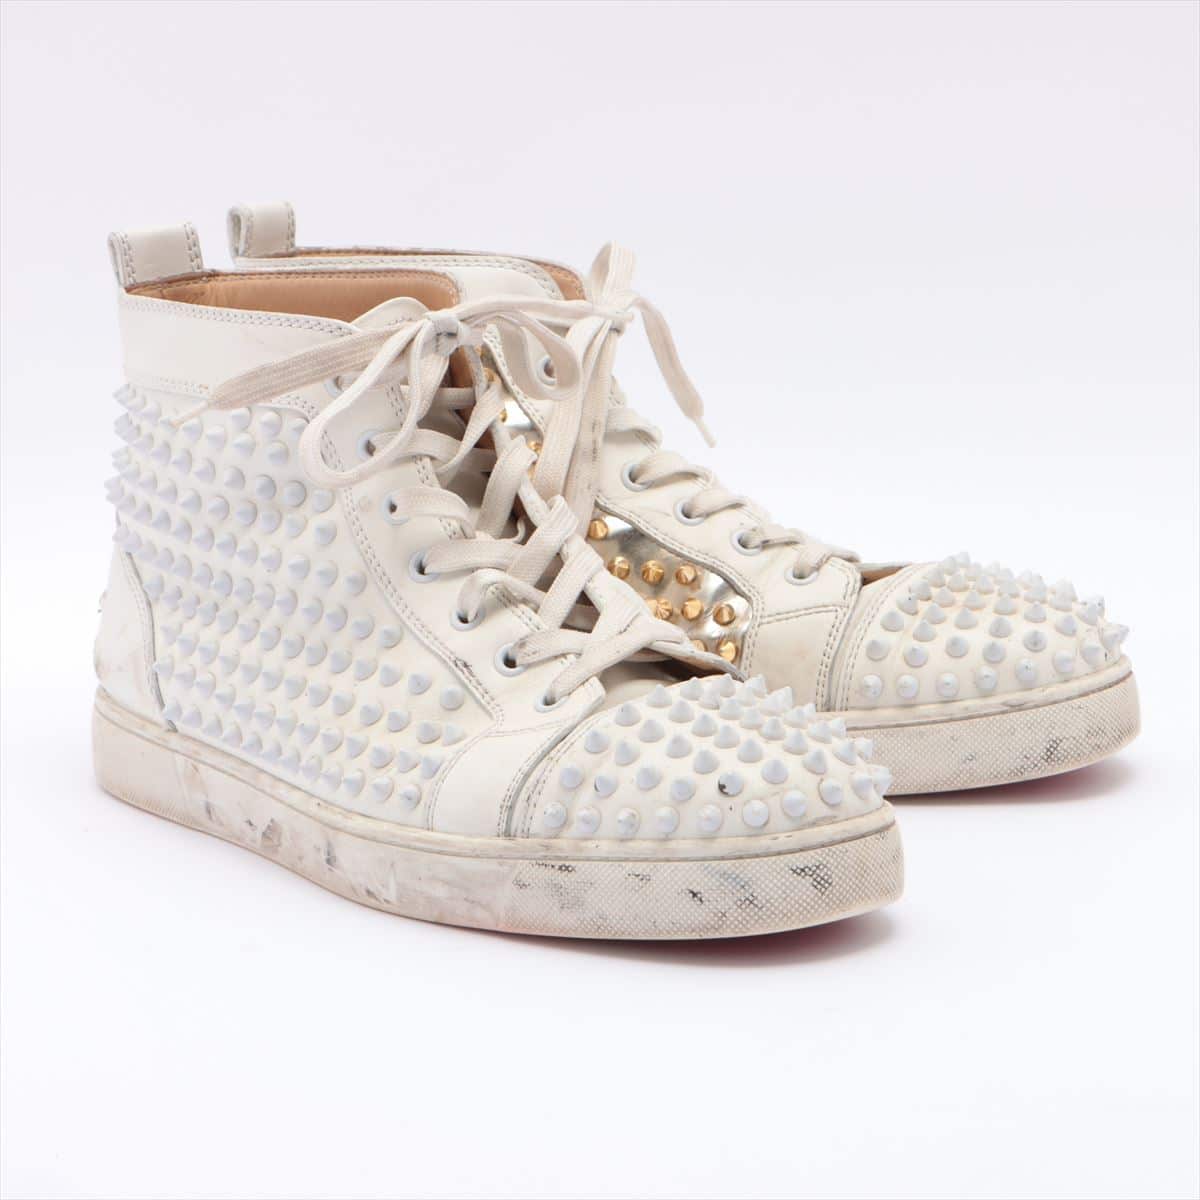 Christian Louboutin Louis Flat Leather High-top Sneakers 44 Men's White Studs